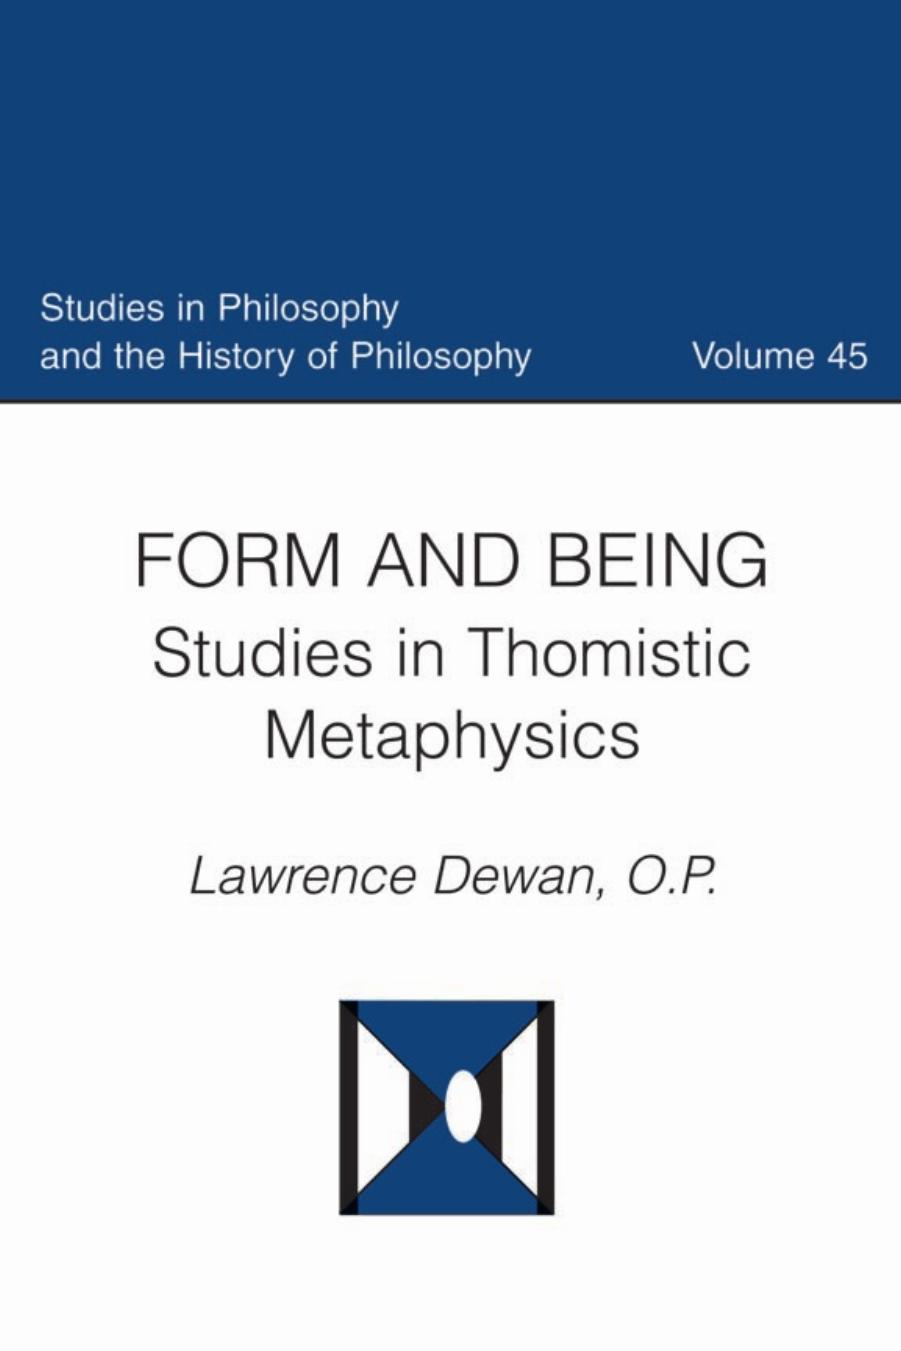 Form and Being: Studies in Thomistic Metaphysics